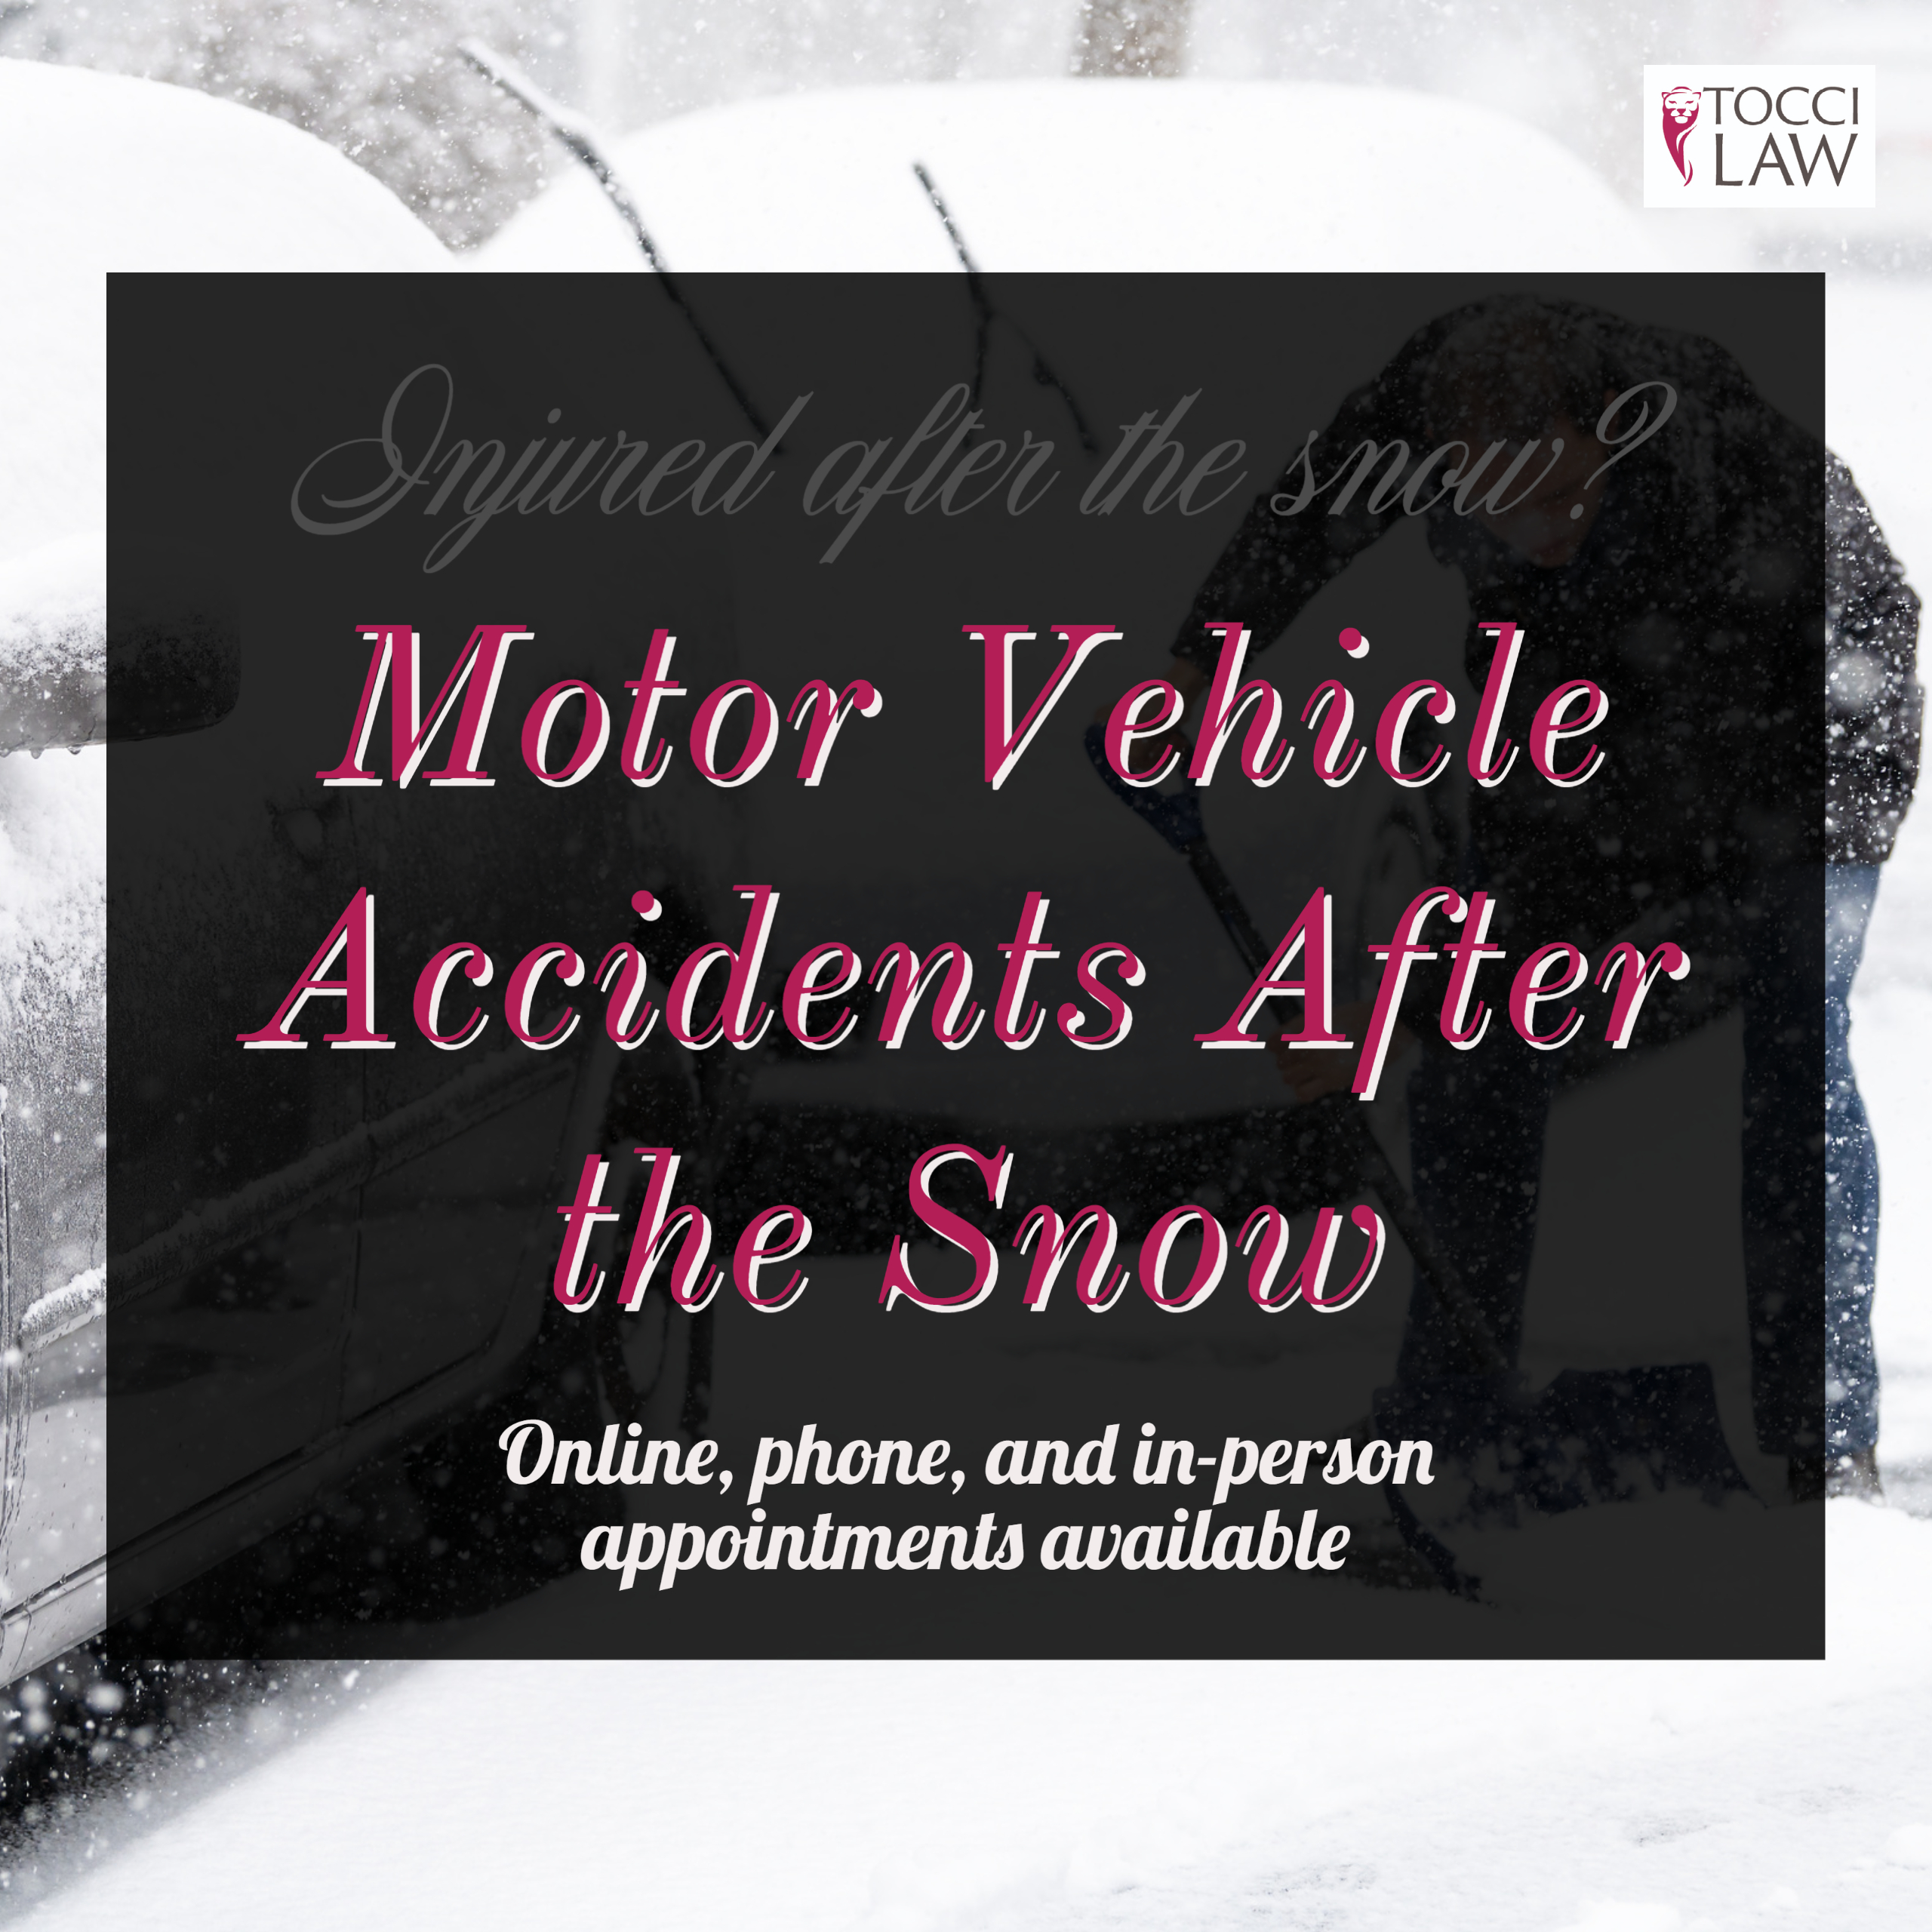 Motor Vehicle Accidents After the Snow